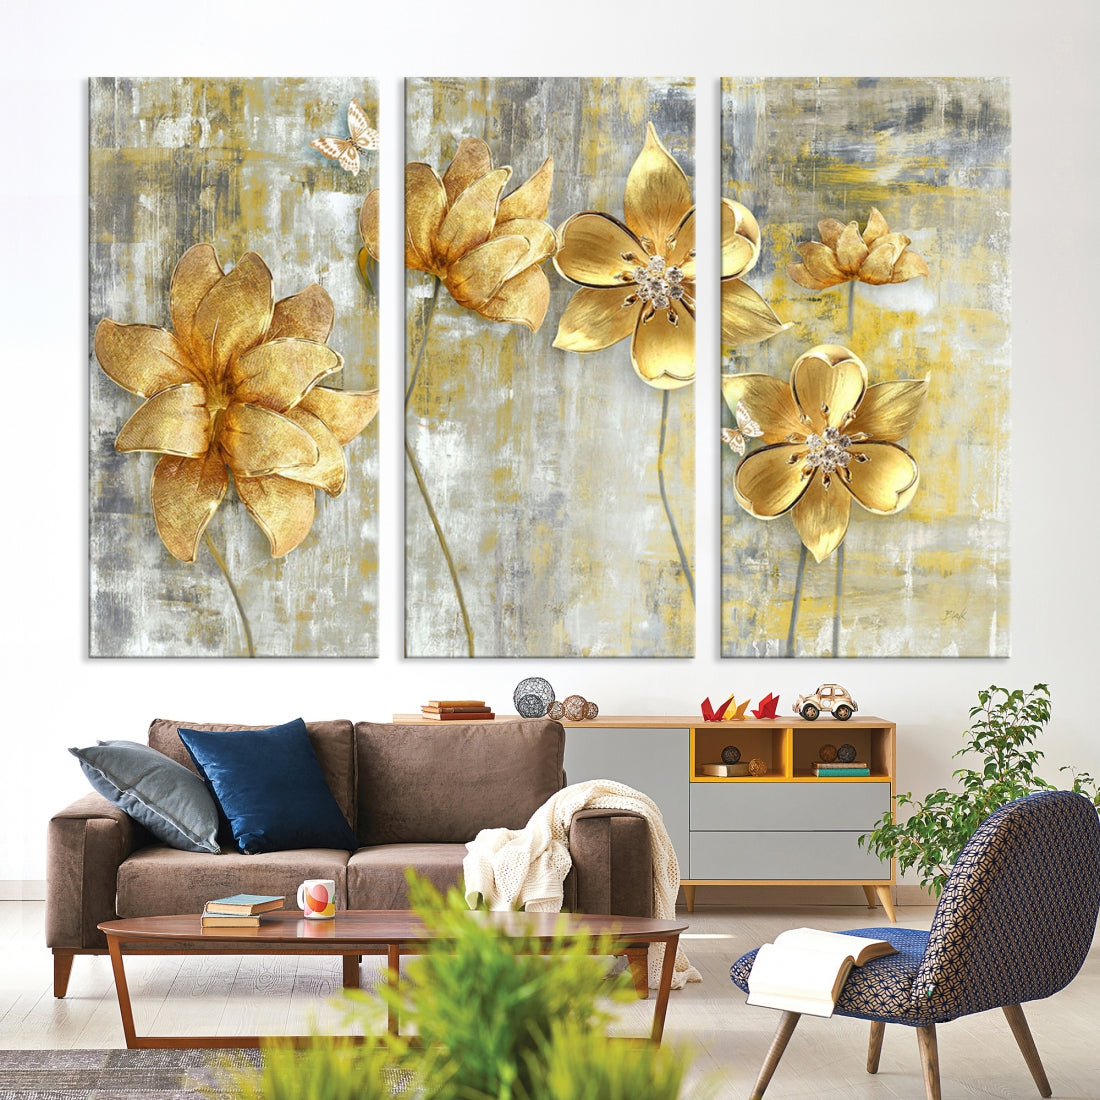 Large Golden Flowers Painting on Original Canvas Print Framed Wall Art